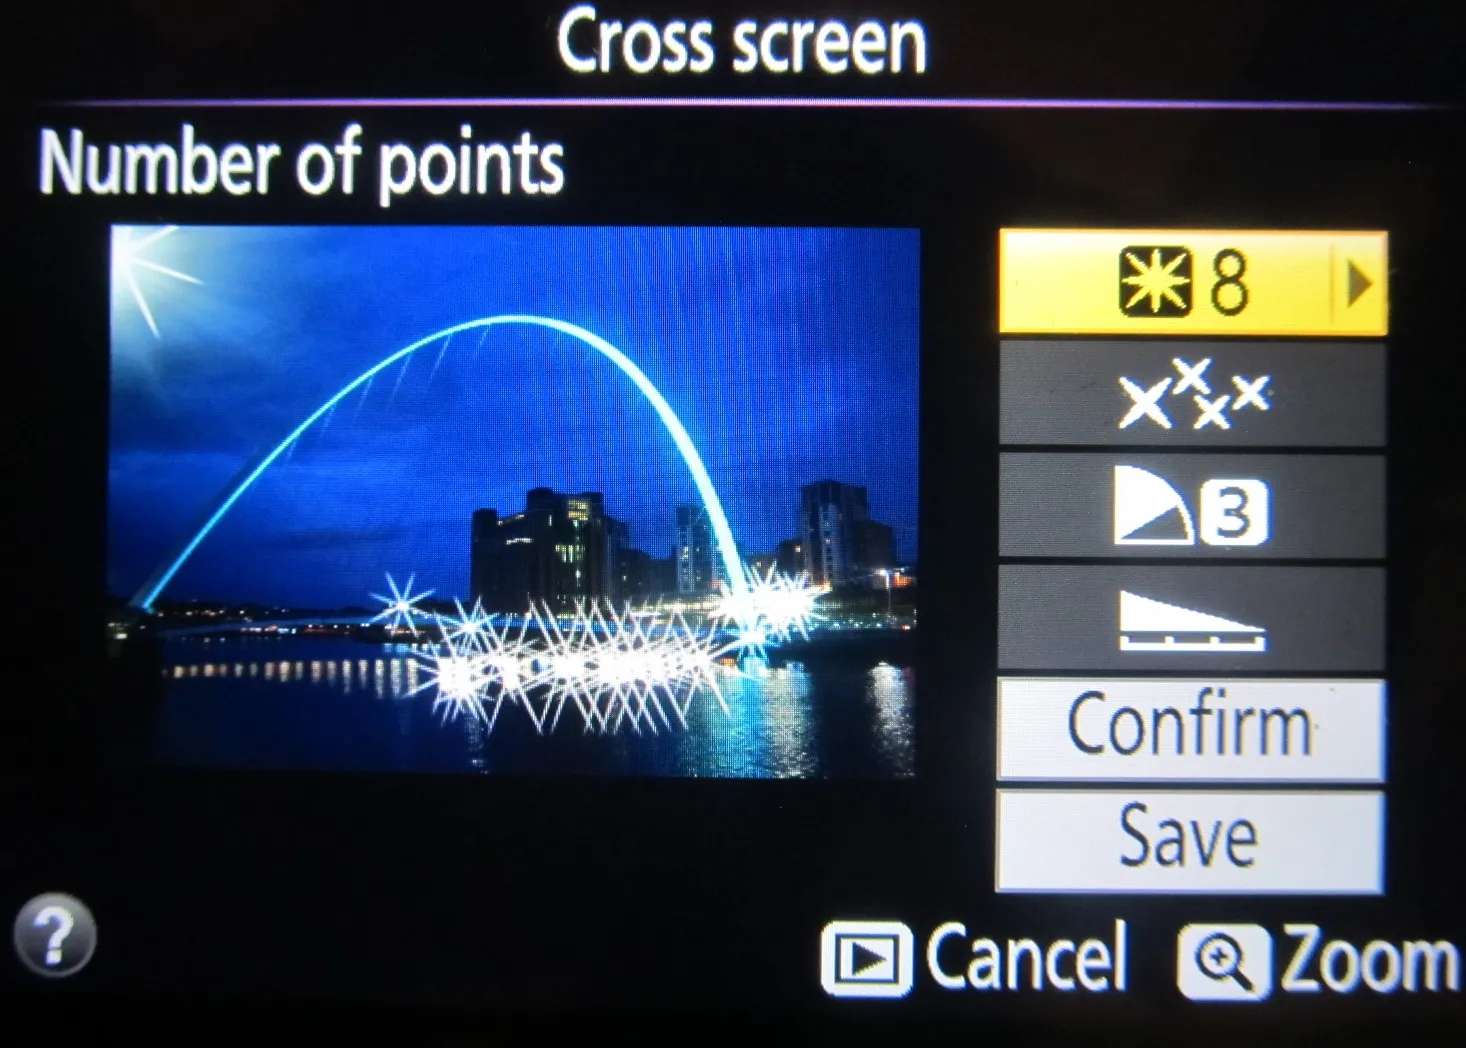 Nikon D5300 cross screen and number of points